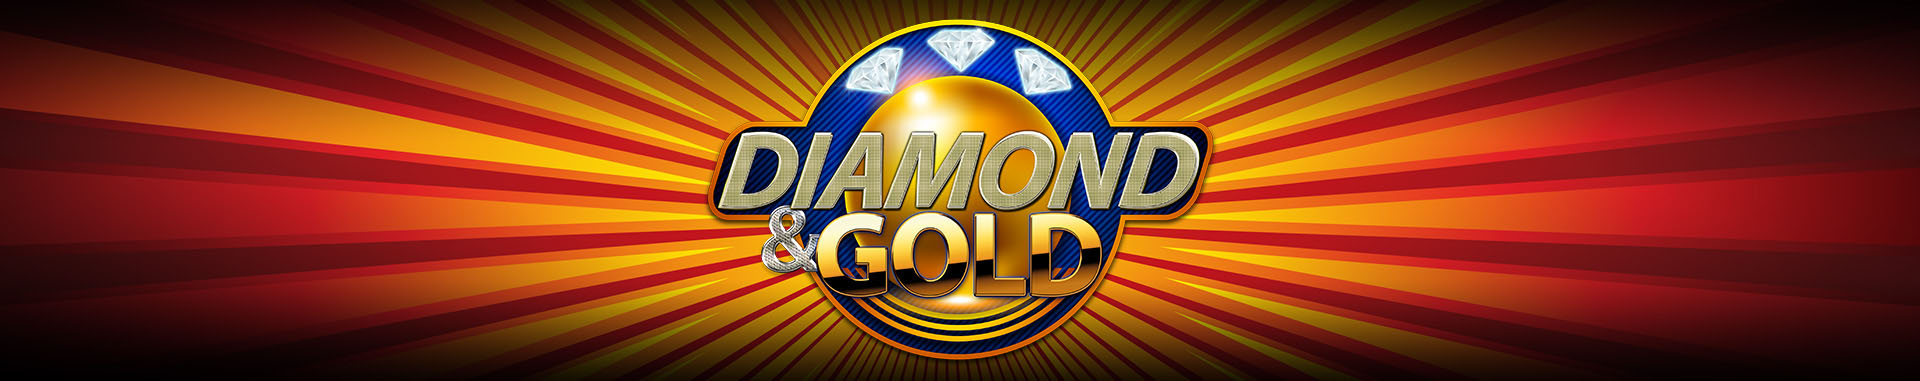 Tragaperras Online Diamond and Gold